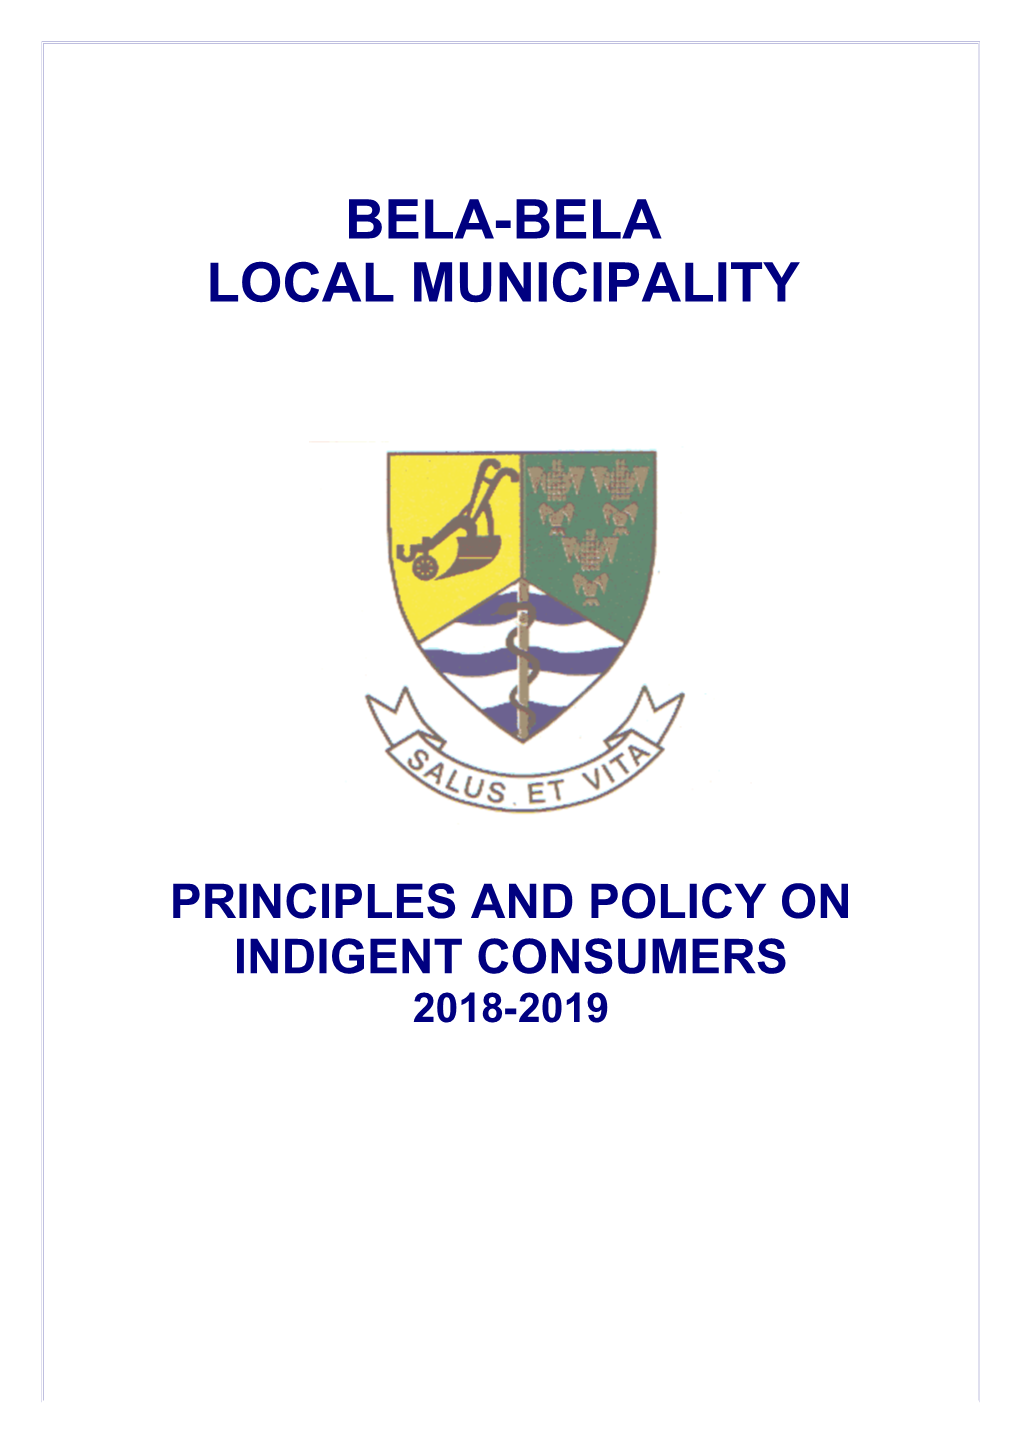 Principles and Policy on Subsidy Scheme for Indigent Households